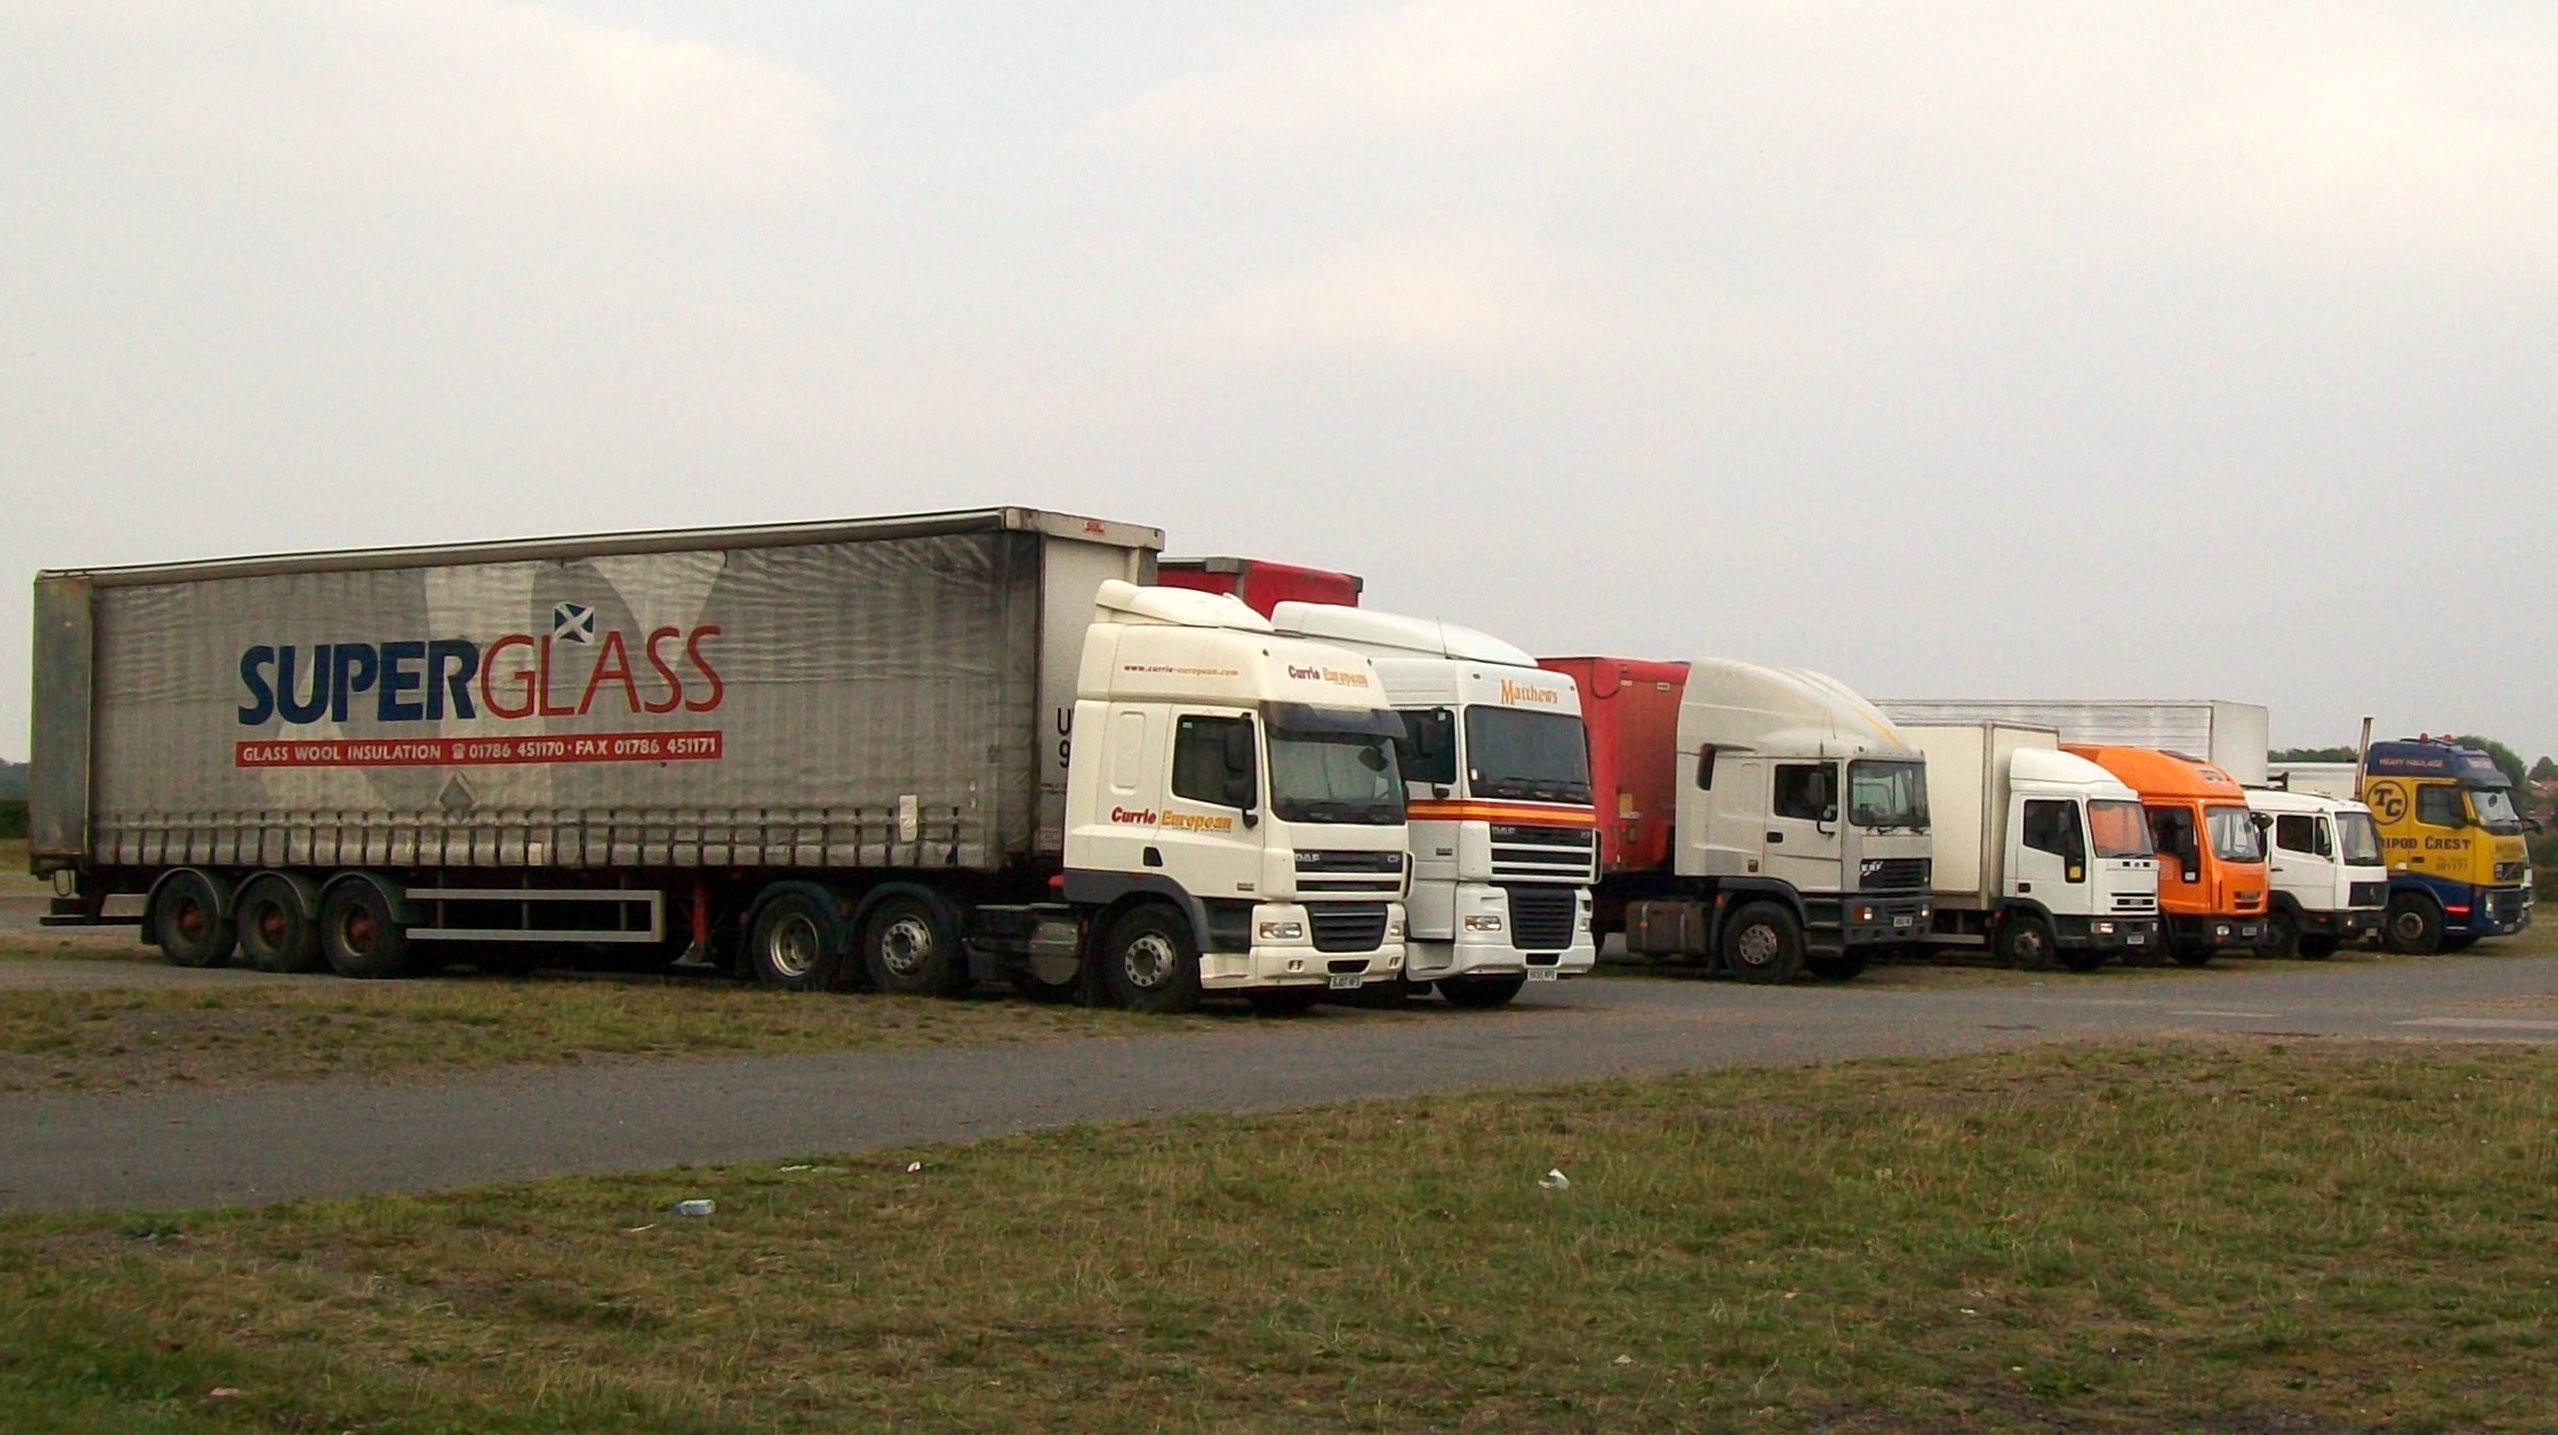 The Road Haulage Association (RHA) estimates there is a shortage of more than 100,000 HGV drivers. Image: Peter O'Connor / Flickr (CC BY-SA 2.0)